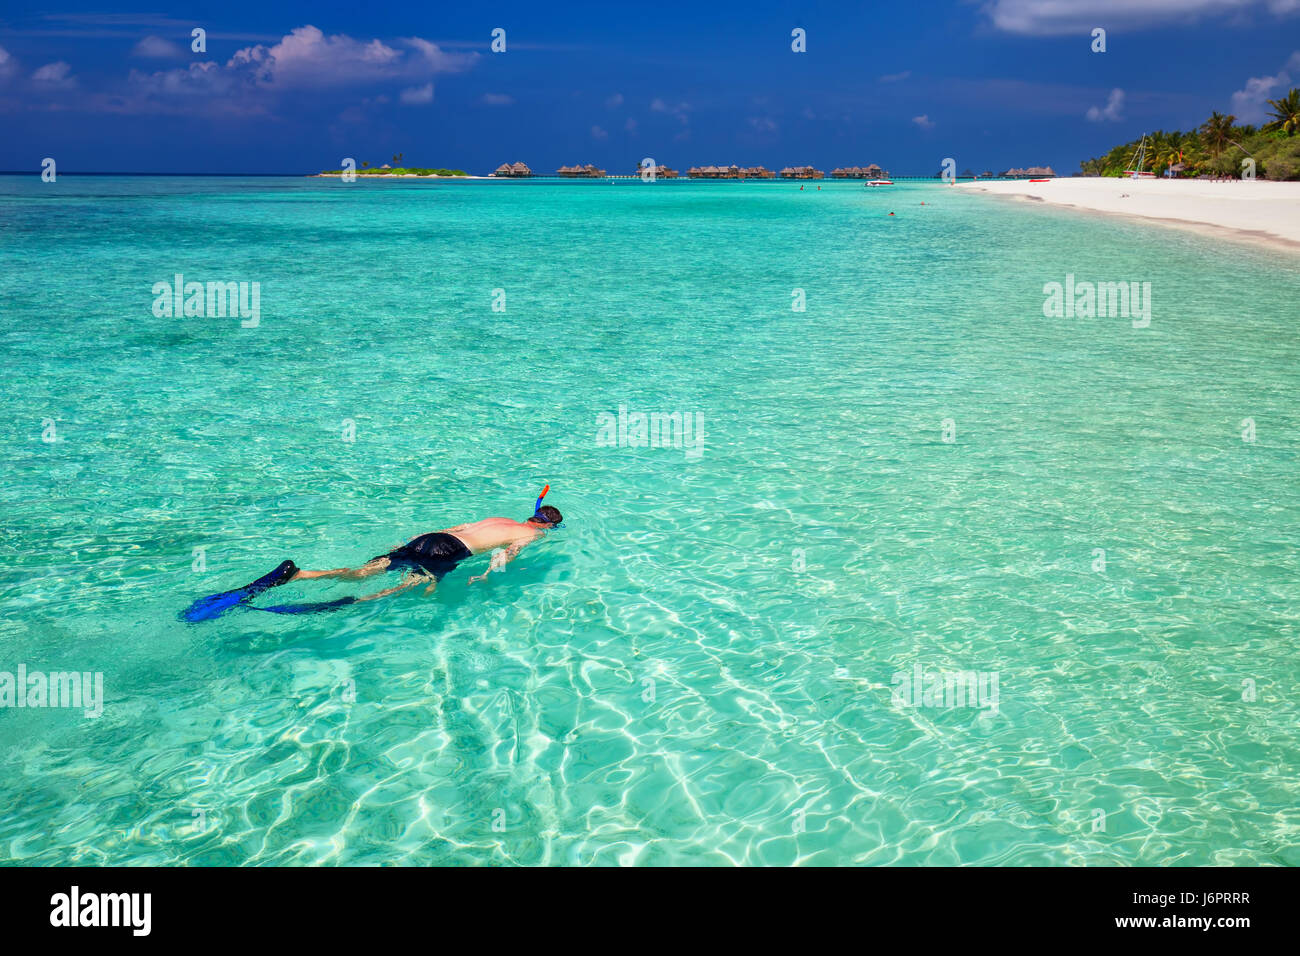 Young man snorkling in tropical lagoon with over water bungalows, Maldives Stock Photo